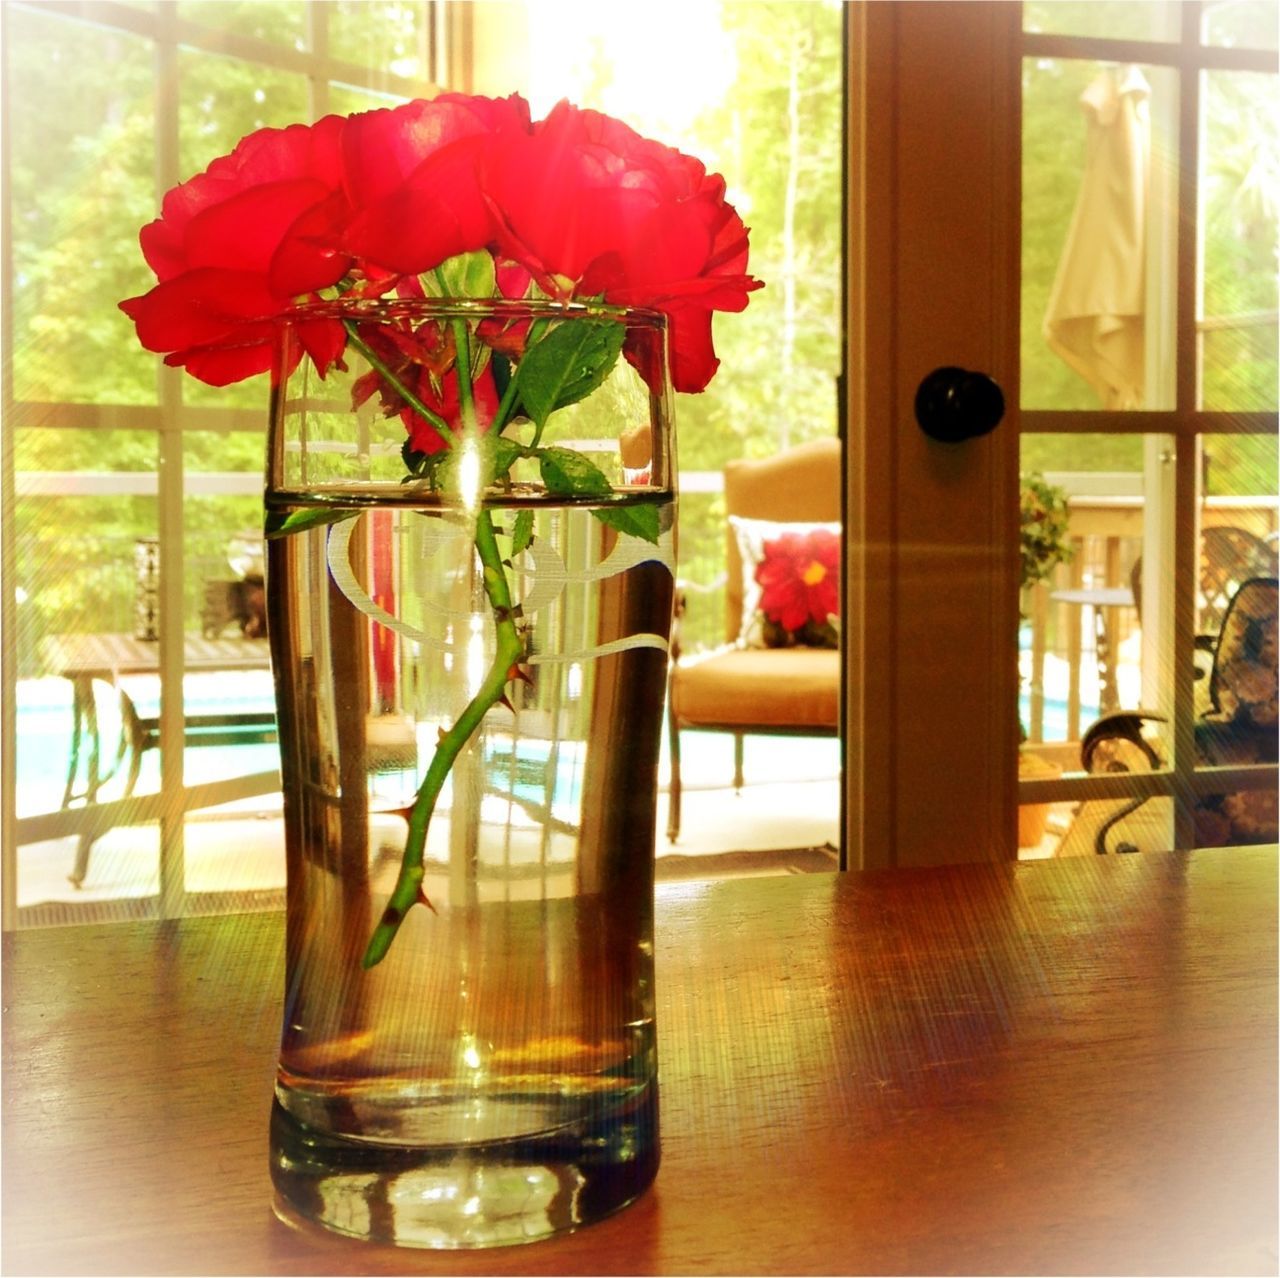 indoors, window, flower, vase, table, glass - material, home interior, transparent, potted plant, window sill, chair, fragility, curtain, freshness, flower pot, glass, house, decoration, red, flower arrangement